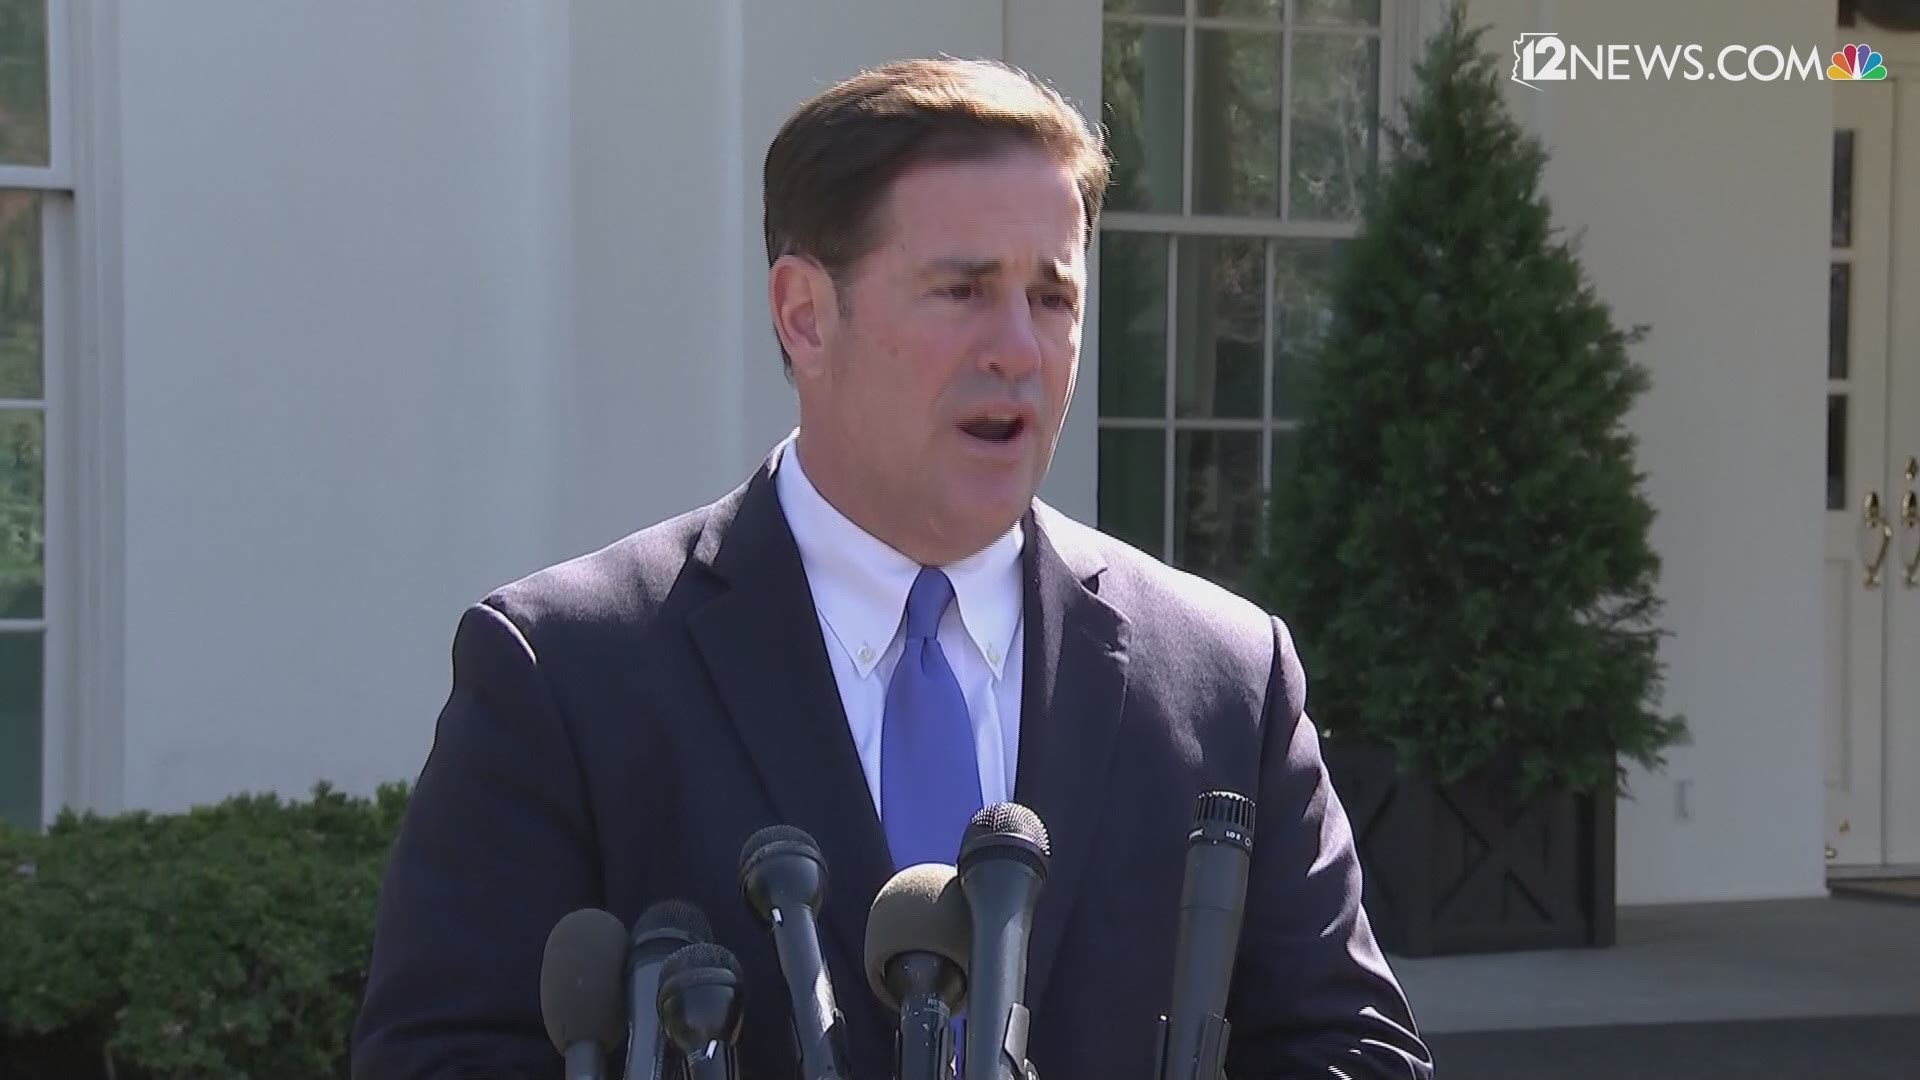 Governor Doug Ducey met with President Trump Wednesday afternoon to discuss border security. Recently President Trump has been threatening to close the border between the US and Mexico. Ducey told reporters he would support this measure if it was absolutely necessary. On Monday the governor said he did not support closing the border.